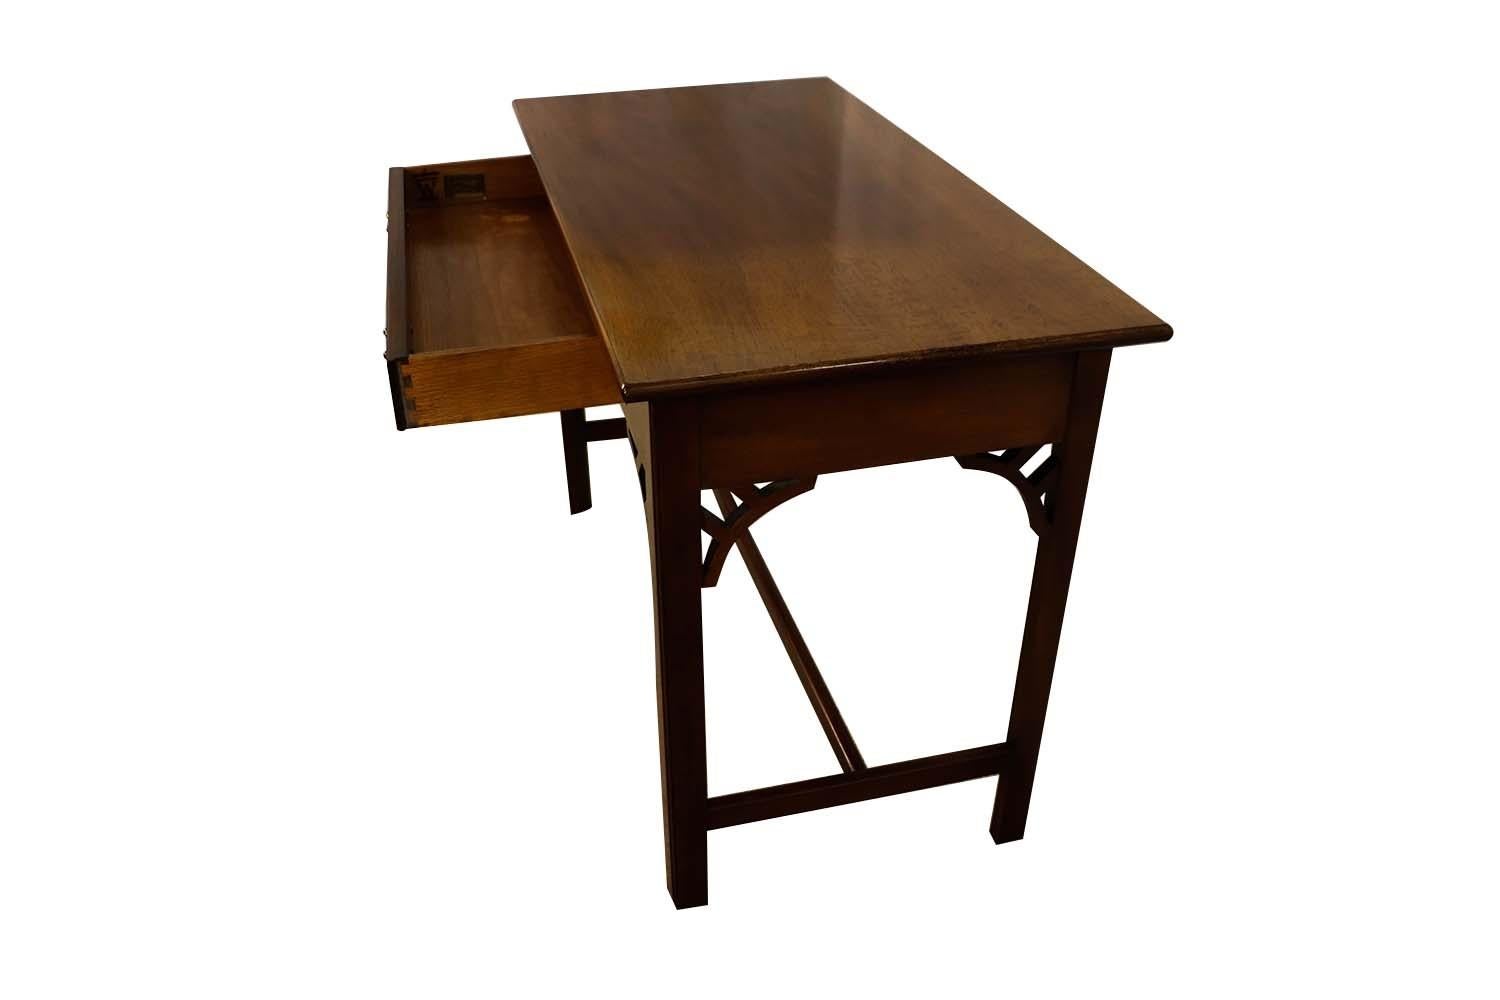 A solid mahogany hall console table or writing desk from the Williamsburg Adaptation collection by Kittinger Furniture Company of NY. This mahogany console table features a center drawer with four square legs with Chippendale fretwork attaching the